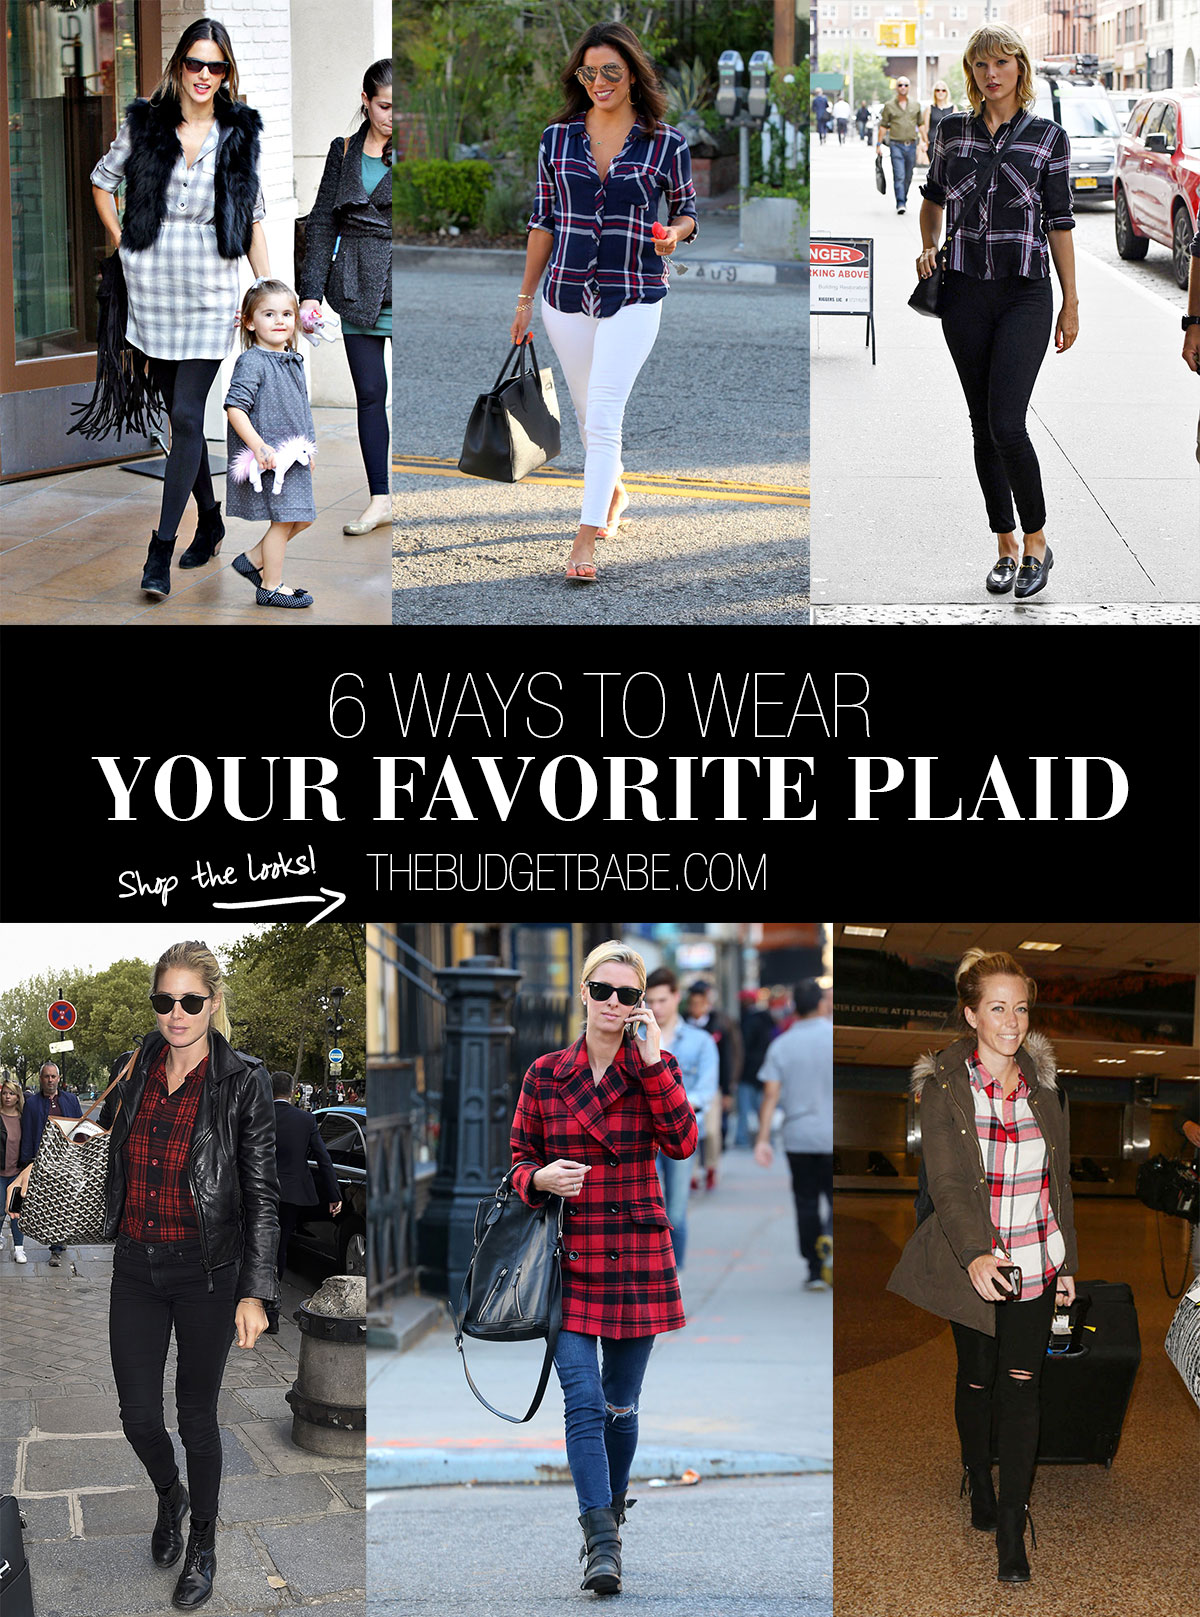 Here's how to wear plaid 6 ways inspired by your favorite celebs.